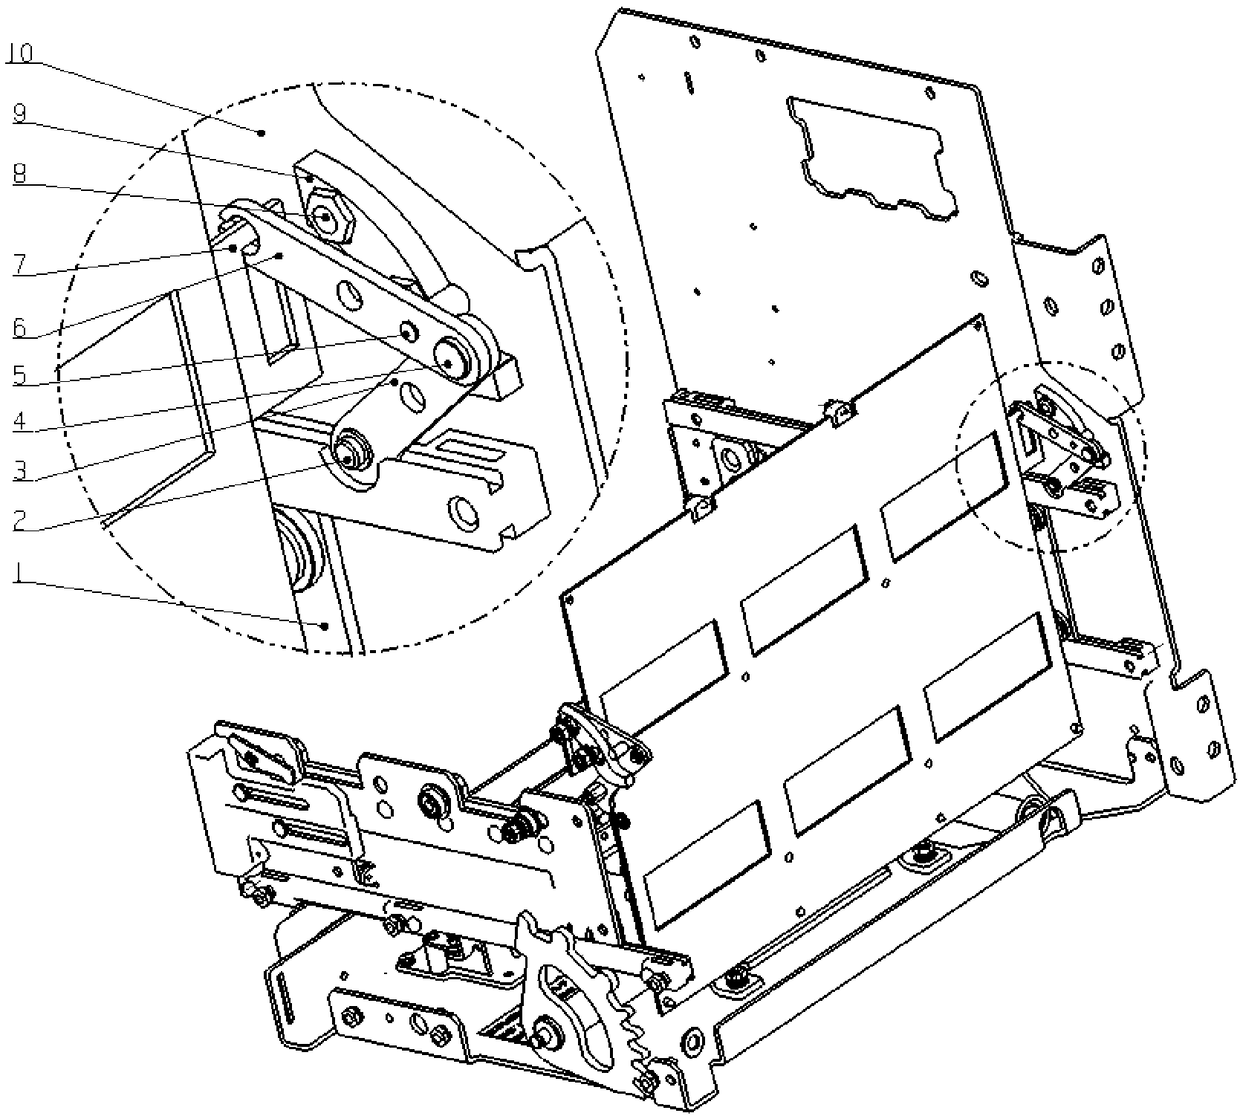 A moving mechanism of the isolation plate in the drawer base of a drawer circuit breaker